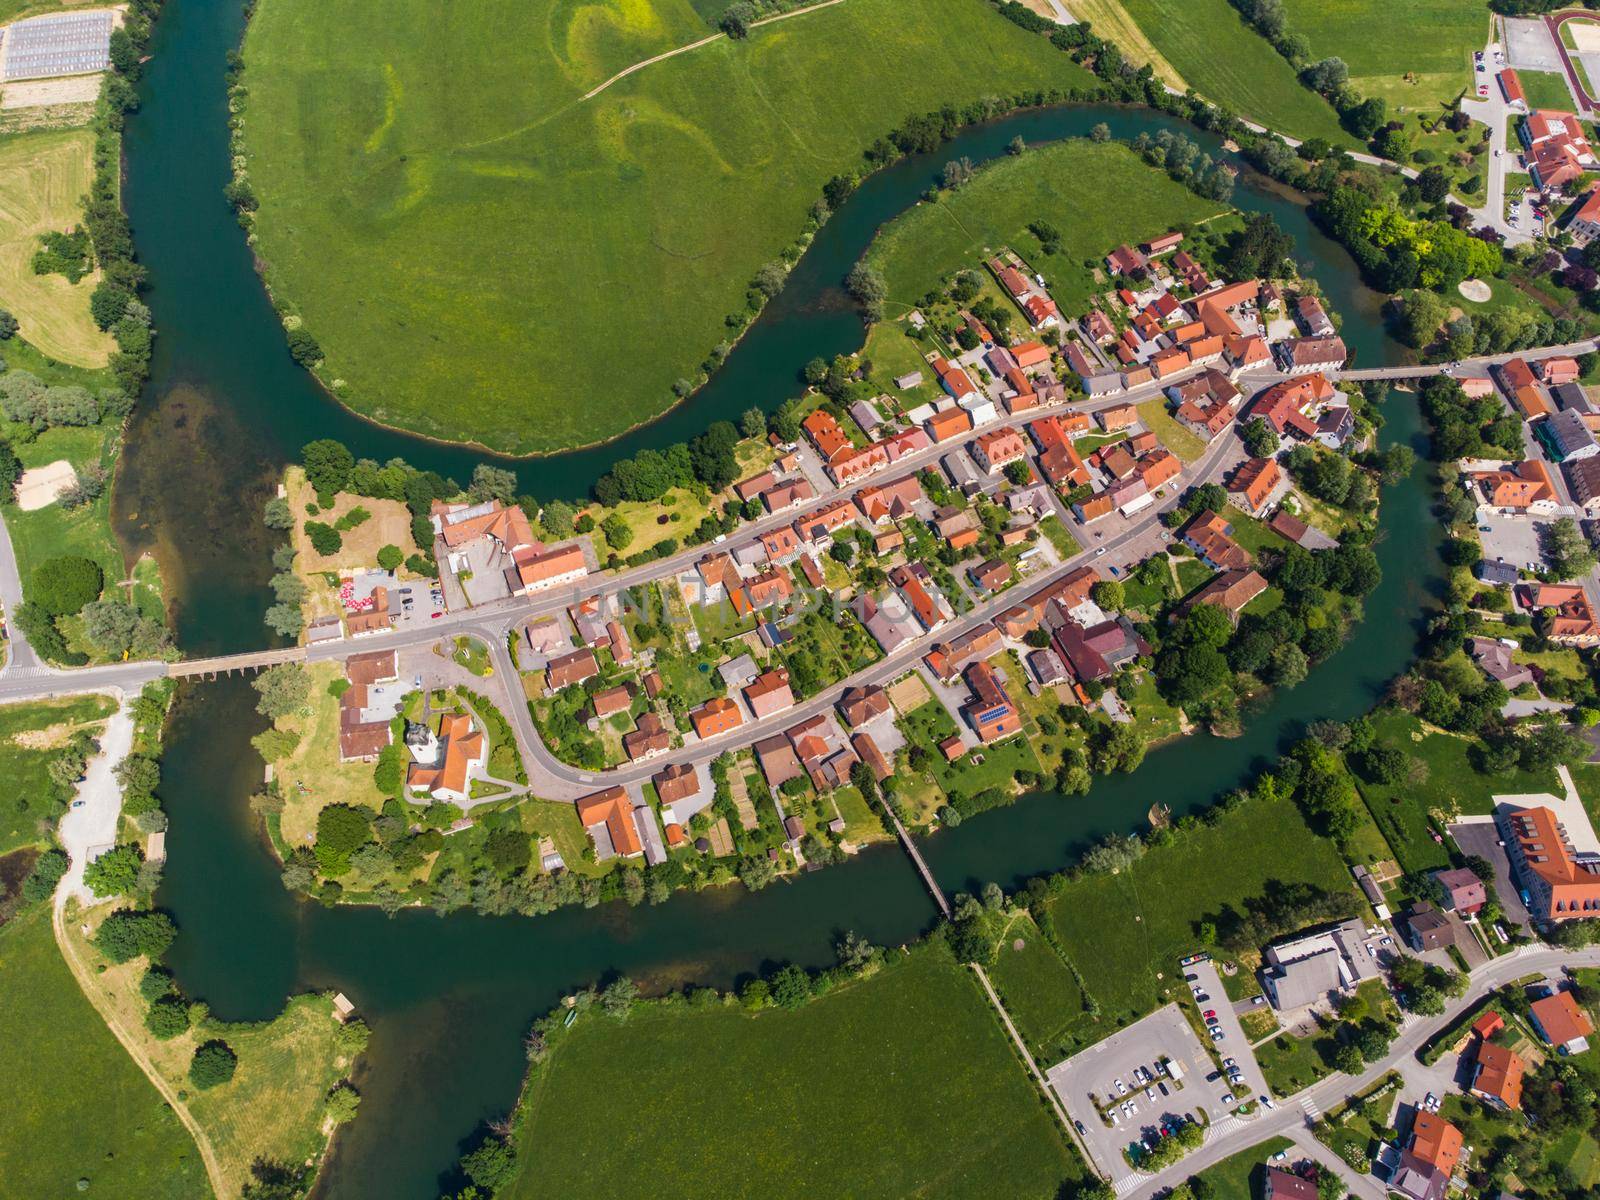 Kostanjevica na Krki Medieval Town Surrounded by Krka River, Slovenia, Europe. Aerial view. by kasto